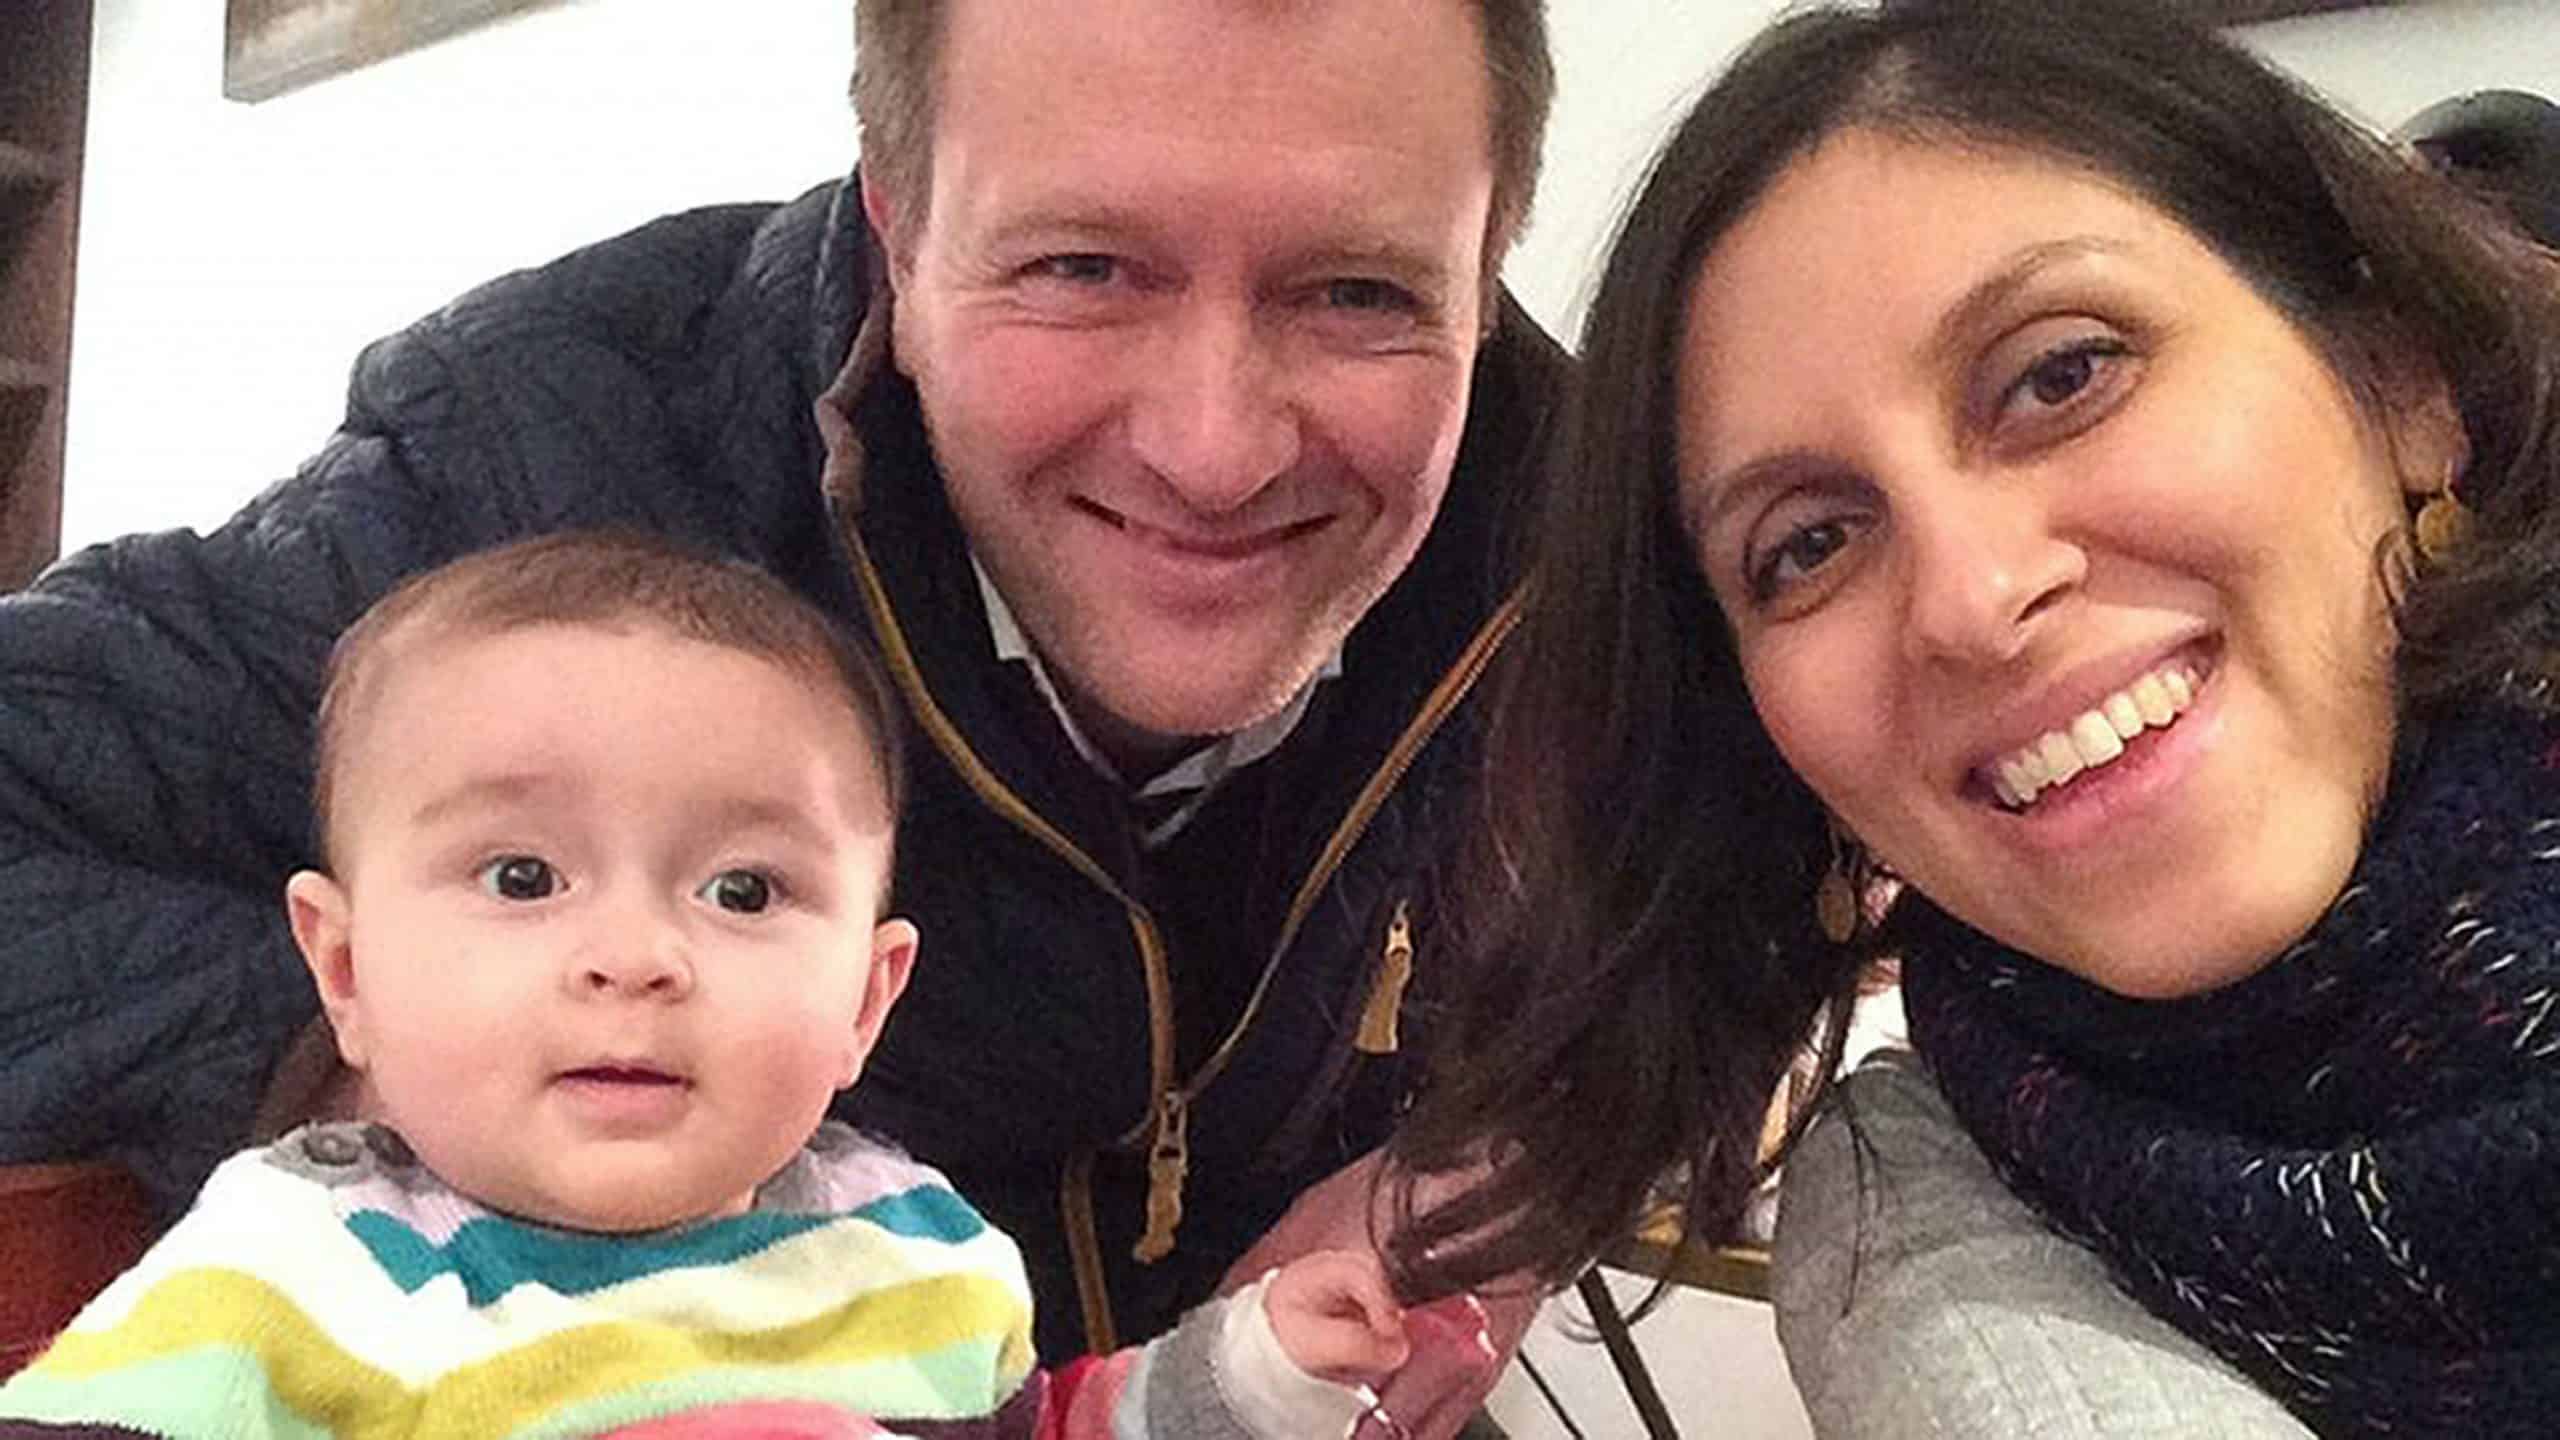 ‘Concerned about her welfare’ as Nazanin Zaghari-Ratcliffe ‘faces new charge’